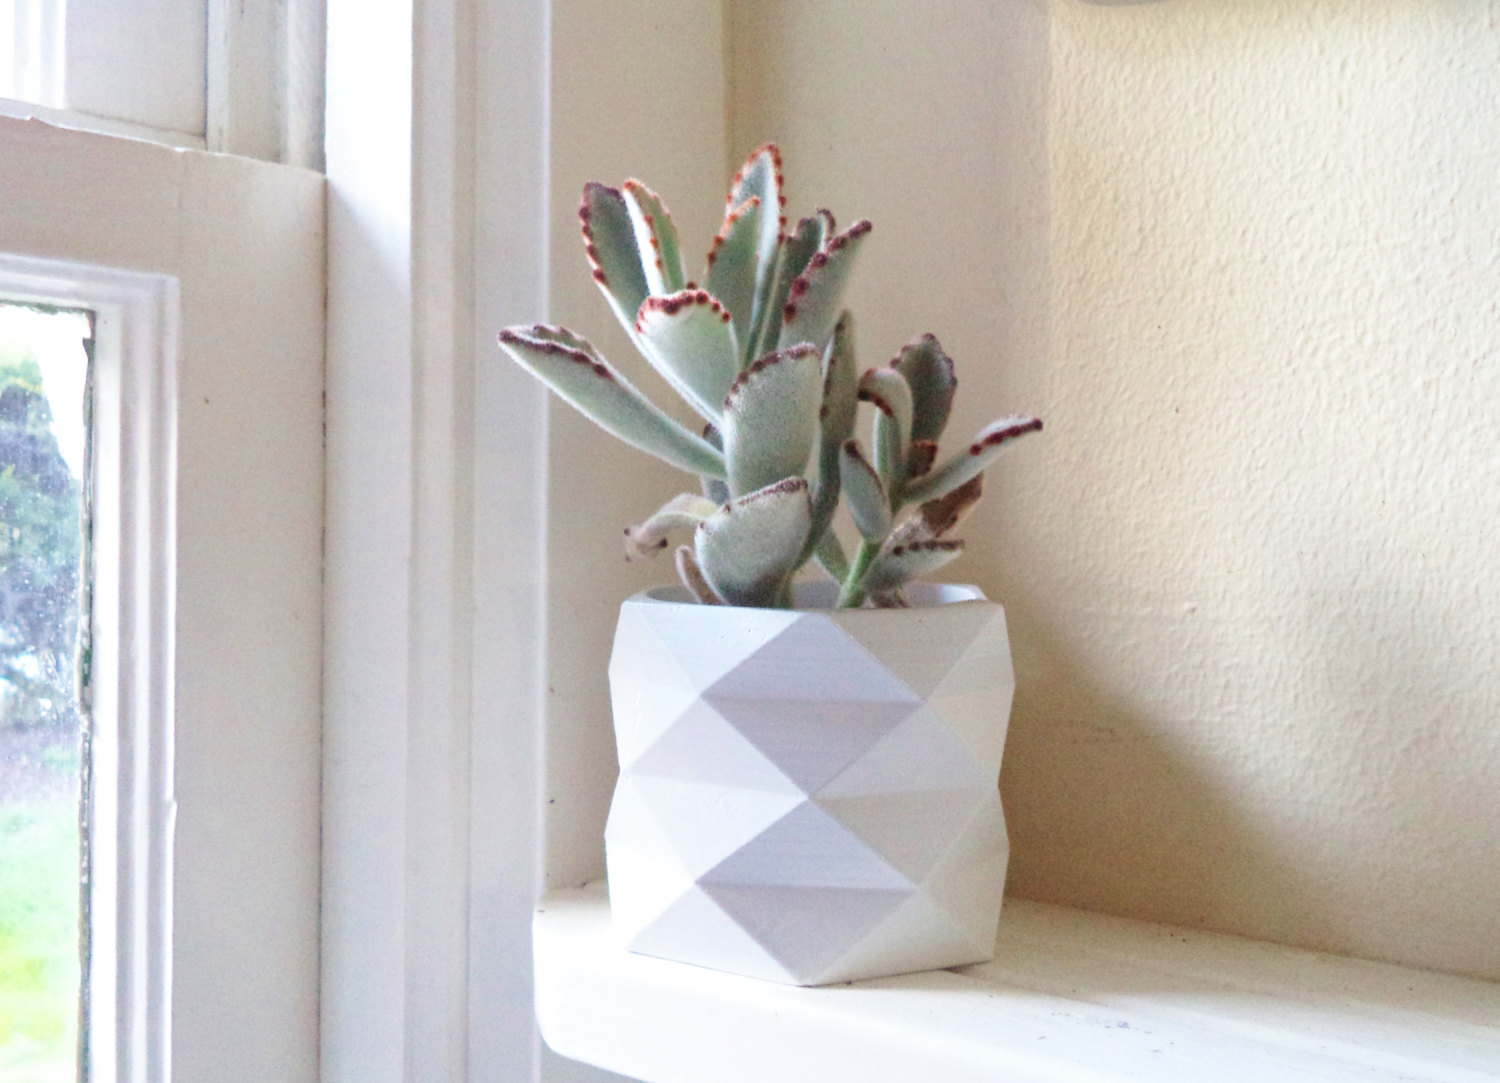 Geometric Succulent Planter from Redwood Stoneworks on Etsy